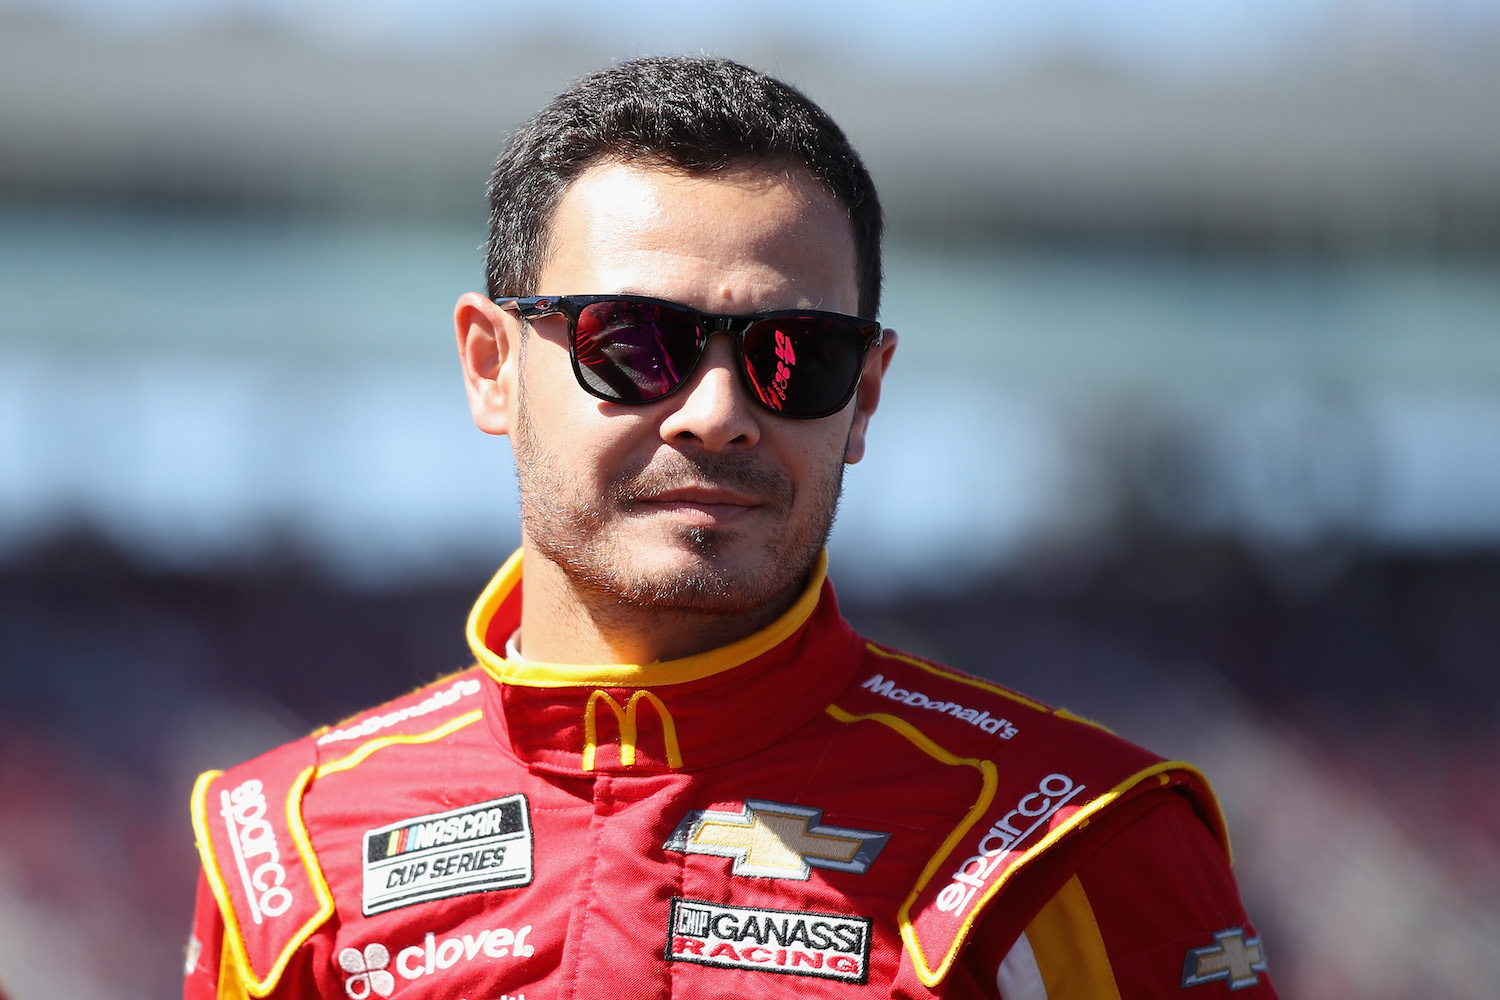 Kyle Larson Proves He’s a Changed Man and Deserving of a Return to NASCAR in Heartfelt Personal Essay